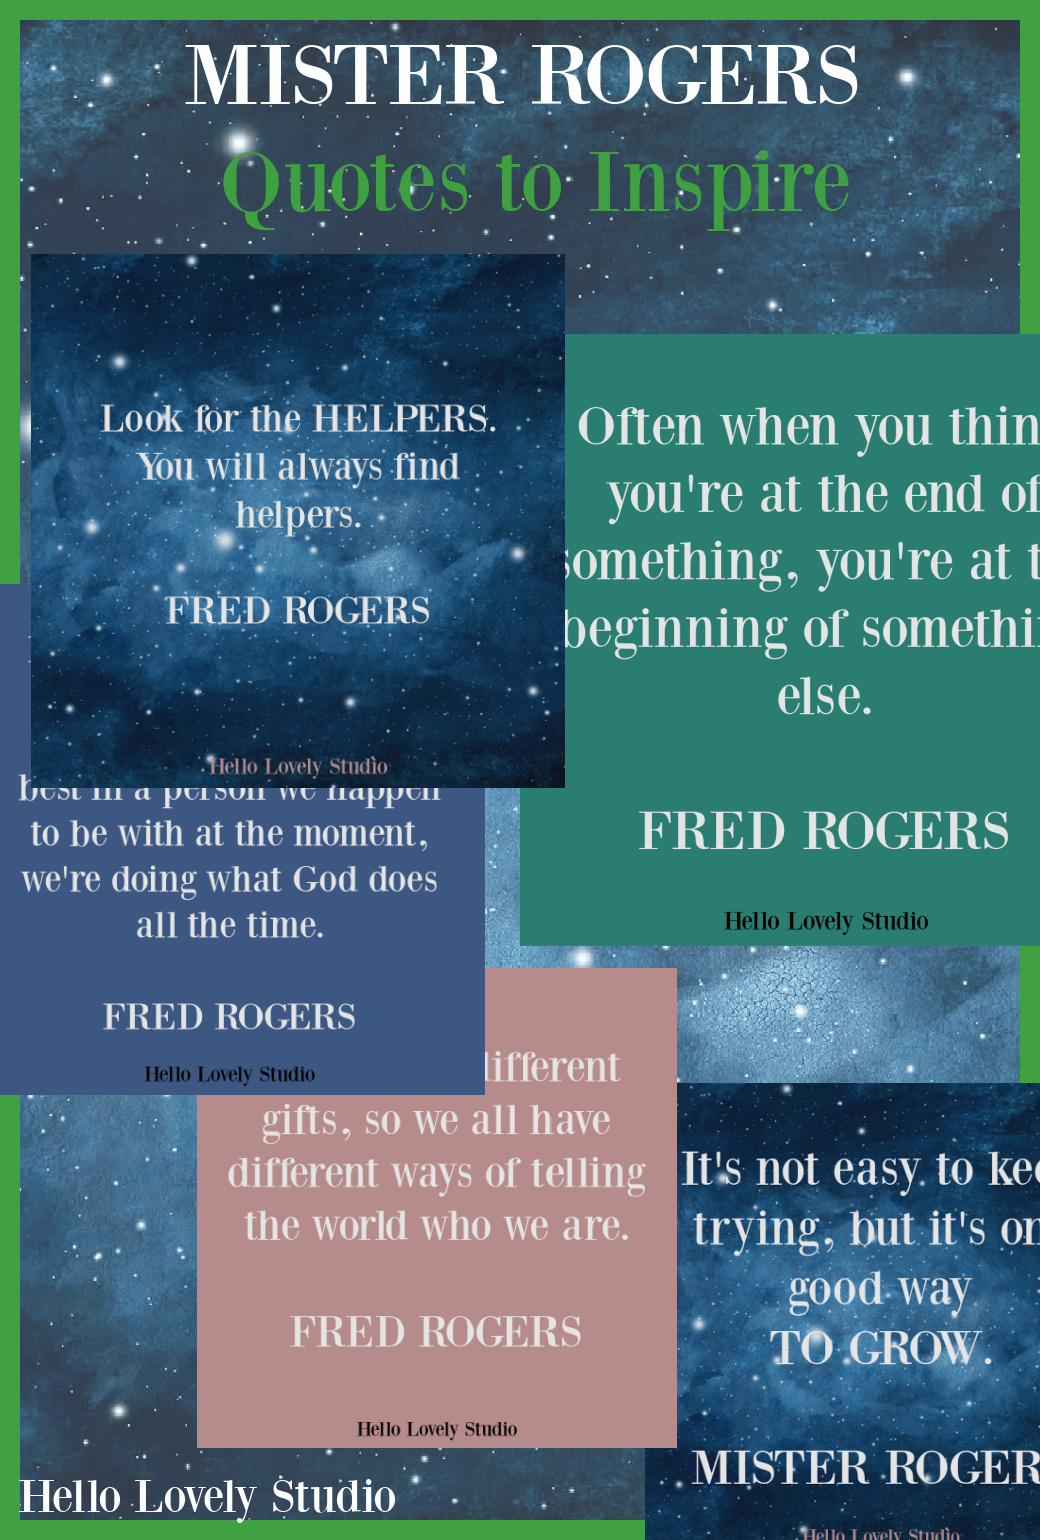 Come find inspiring Mister Rogers quotes about life, love, and kindness on Hello Lovely Studio. #fredrogers #misterrogers #inspirationalquotes